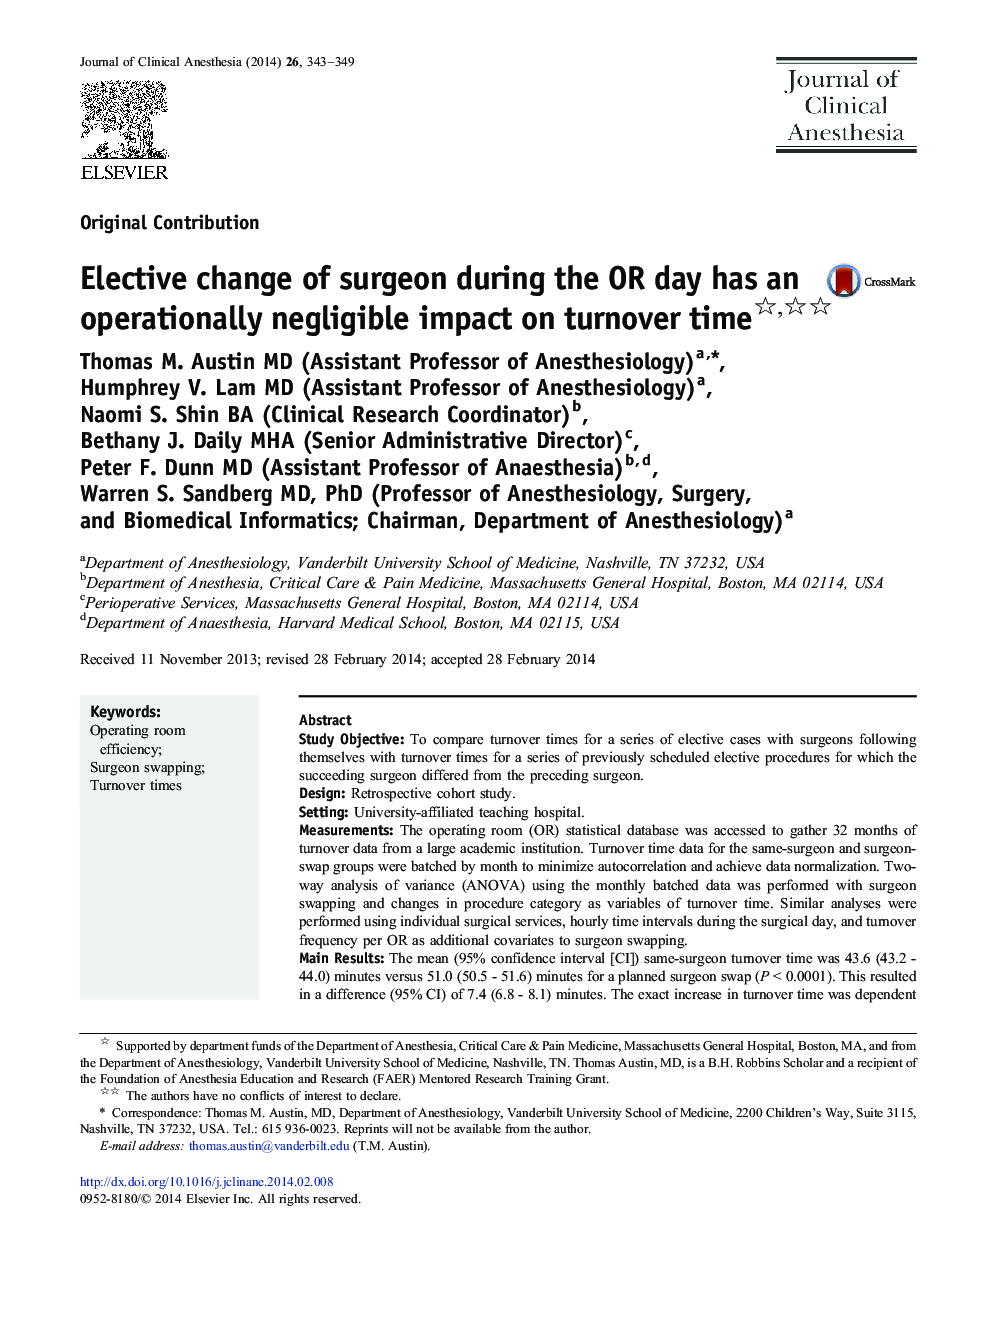 Elective change of surgeon during the OR day has an operationally negligible impact on turnover time 